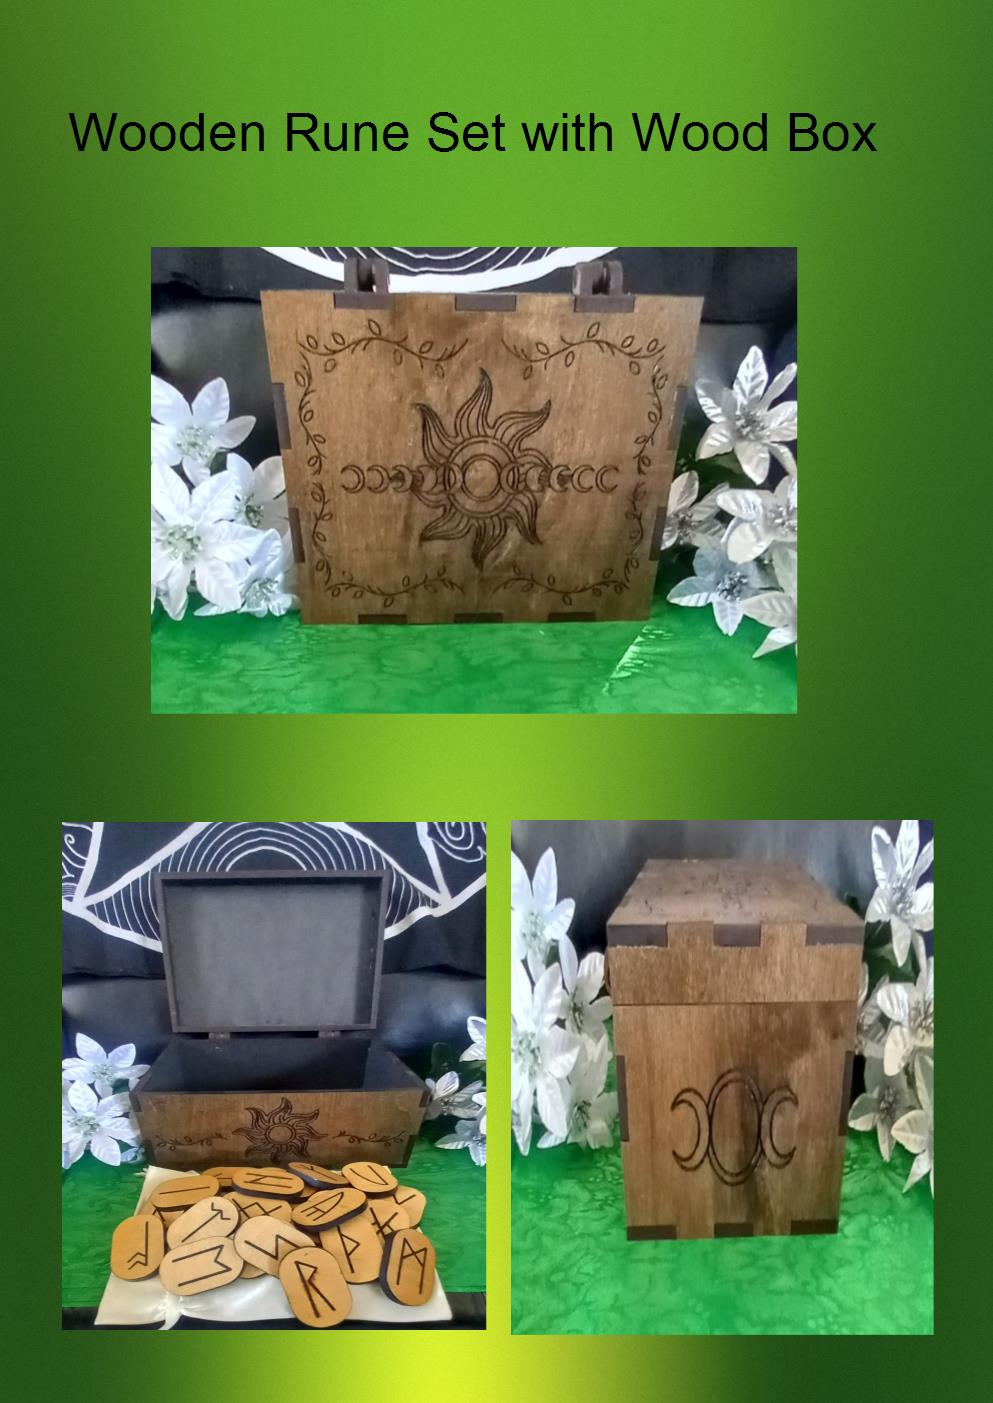 Wooden Rune Set with Wooden Engraved Box